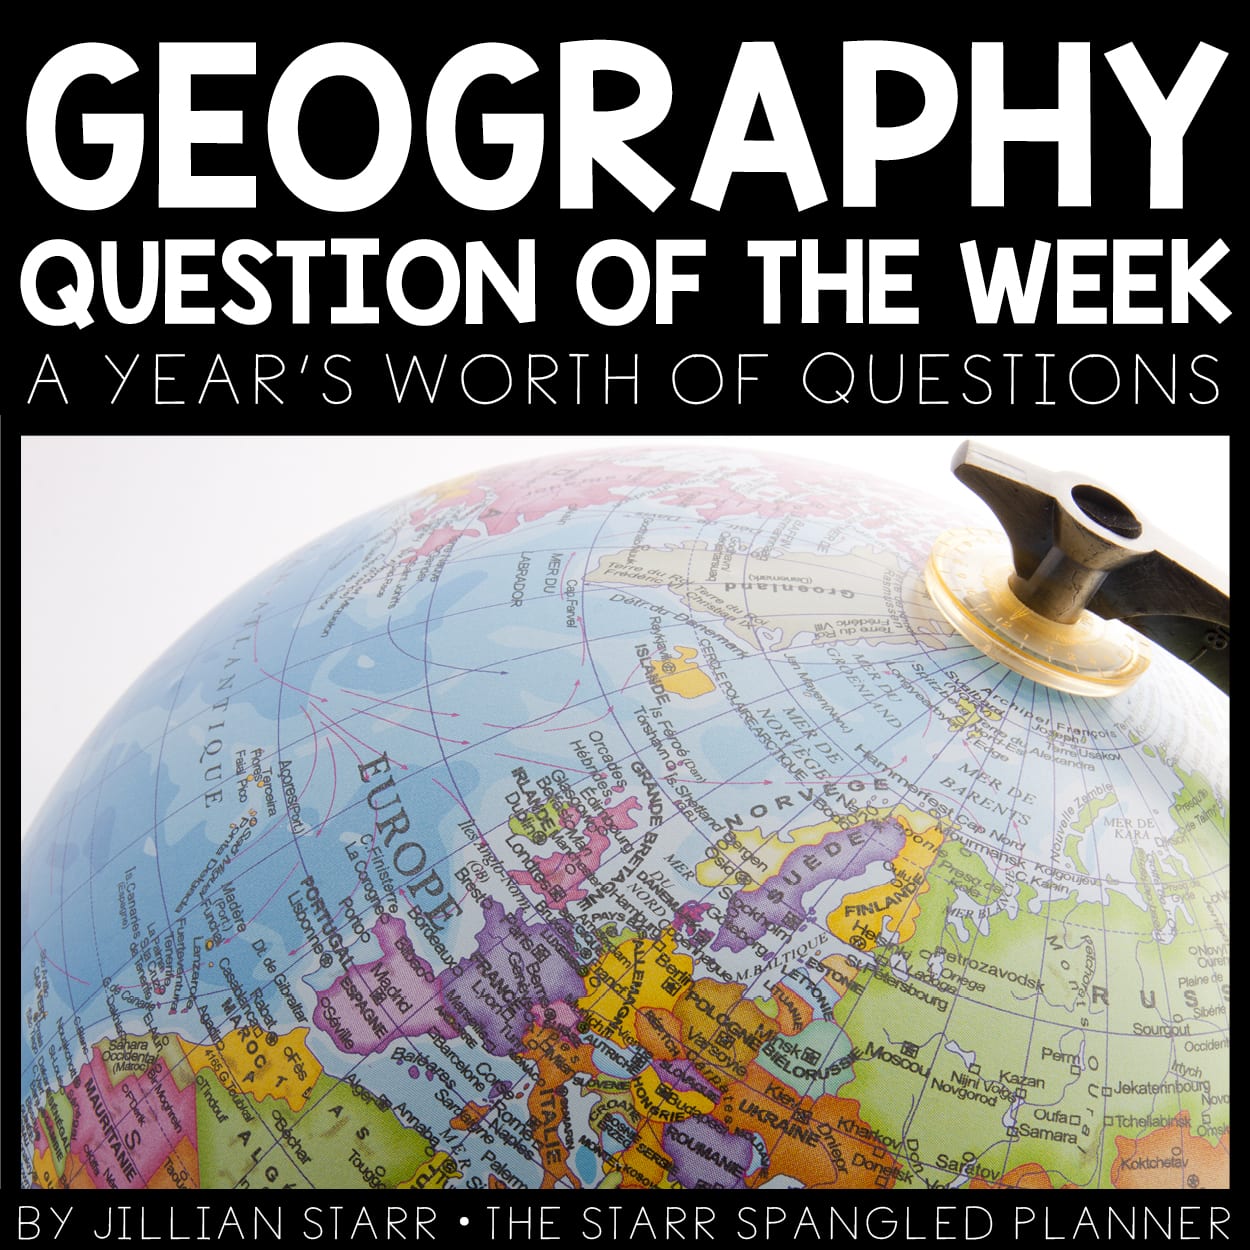 Geography Question of the Week to get students engaged in learning about geography, maps, and the world.